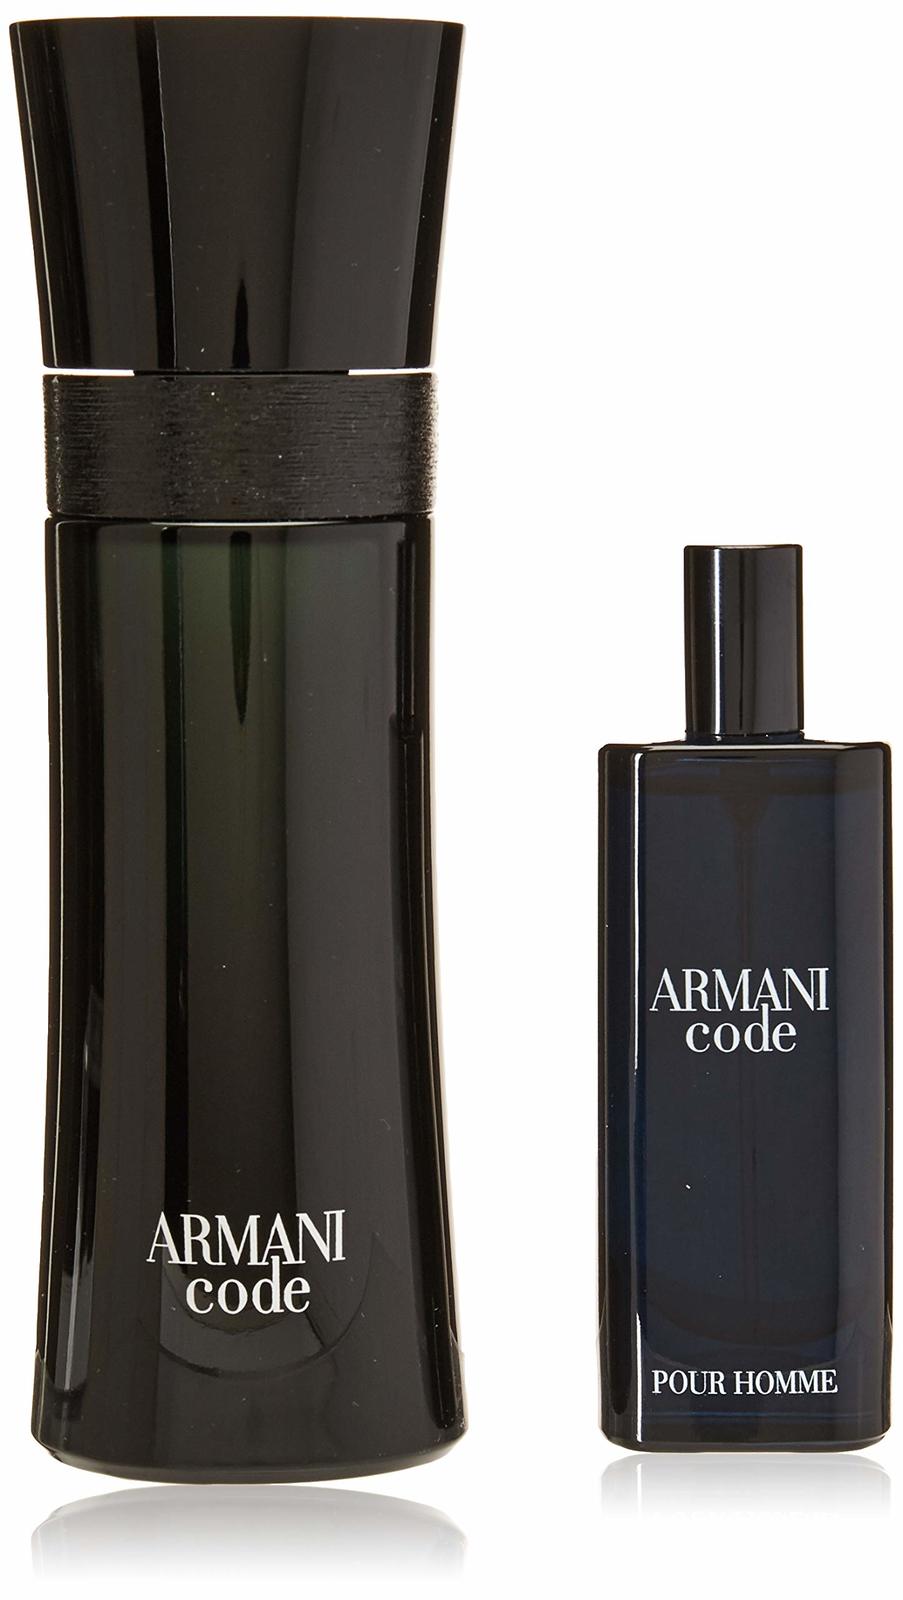 Primary image for Giorgio Armani 2 Piece Code Travel Exclusive Gift Set for Men